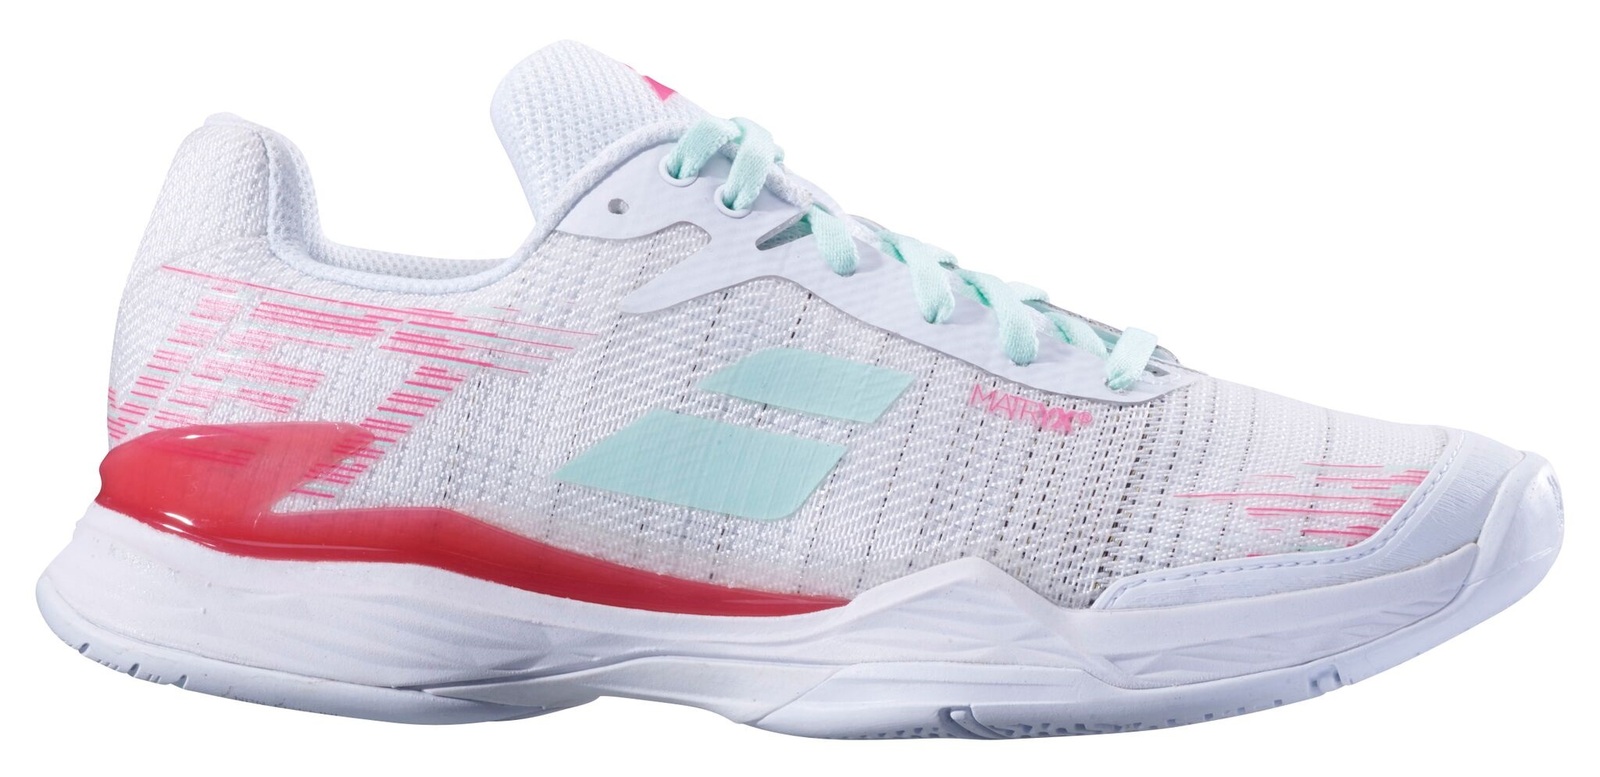 Pink Details about   Babolat Jet Mach II Women's Tennis Shoes Sneakers Authorized Dealer 